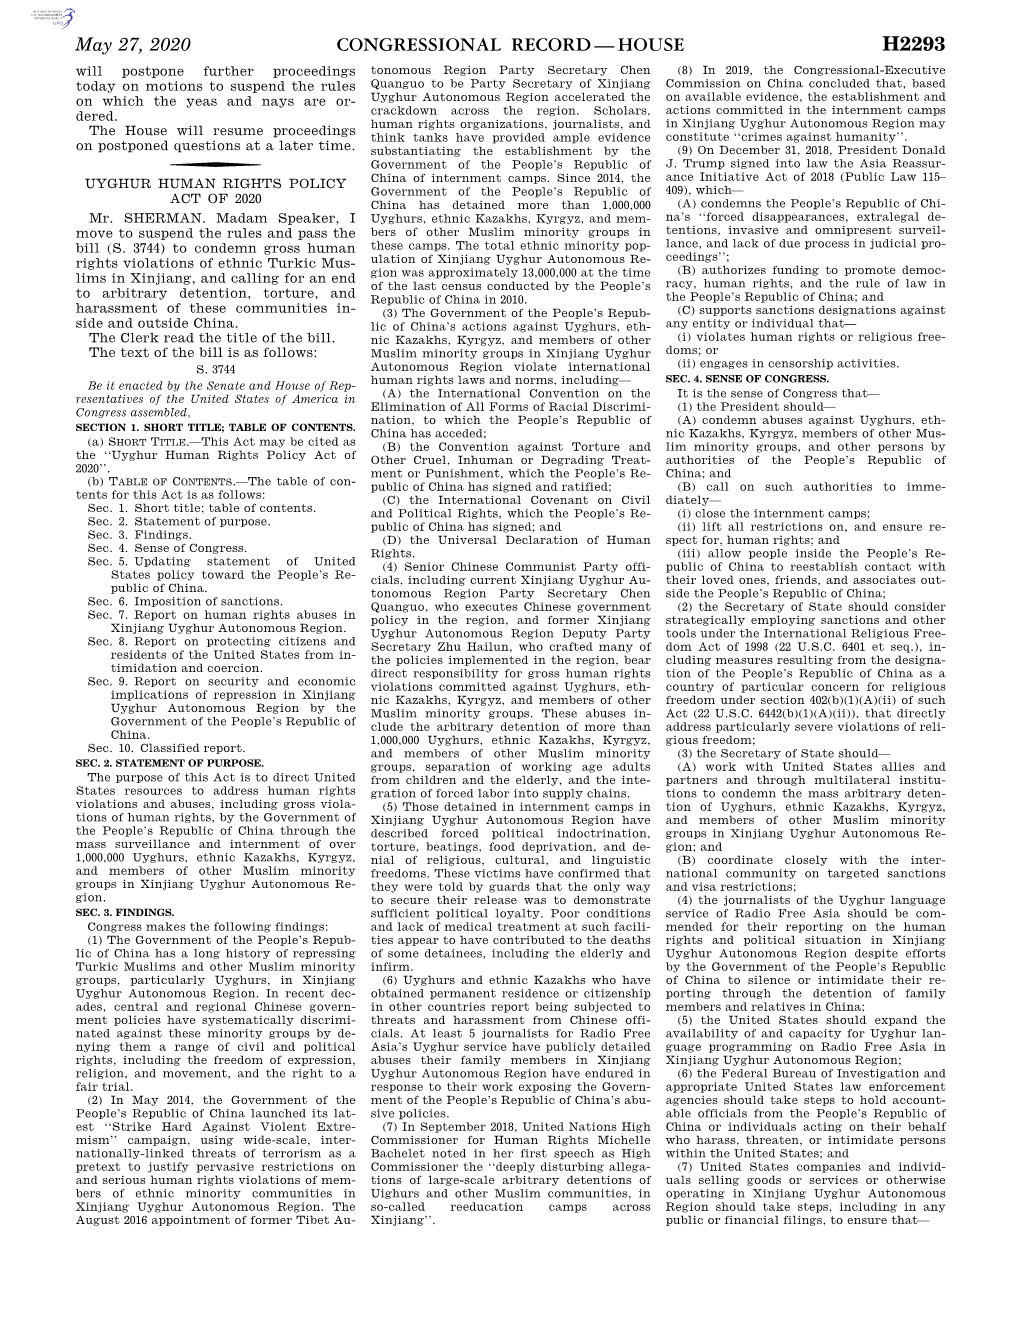 Congressional Record—House H2293